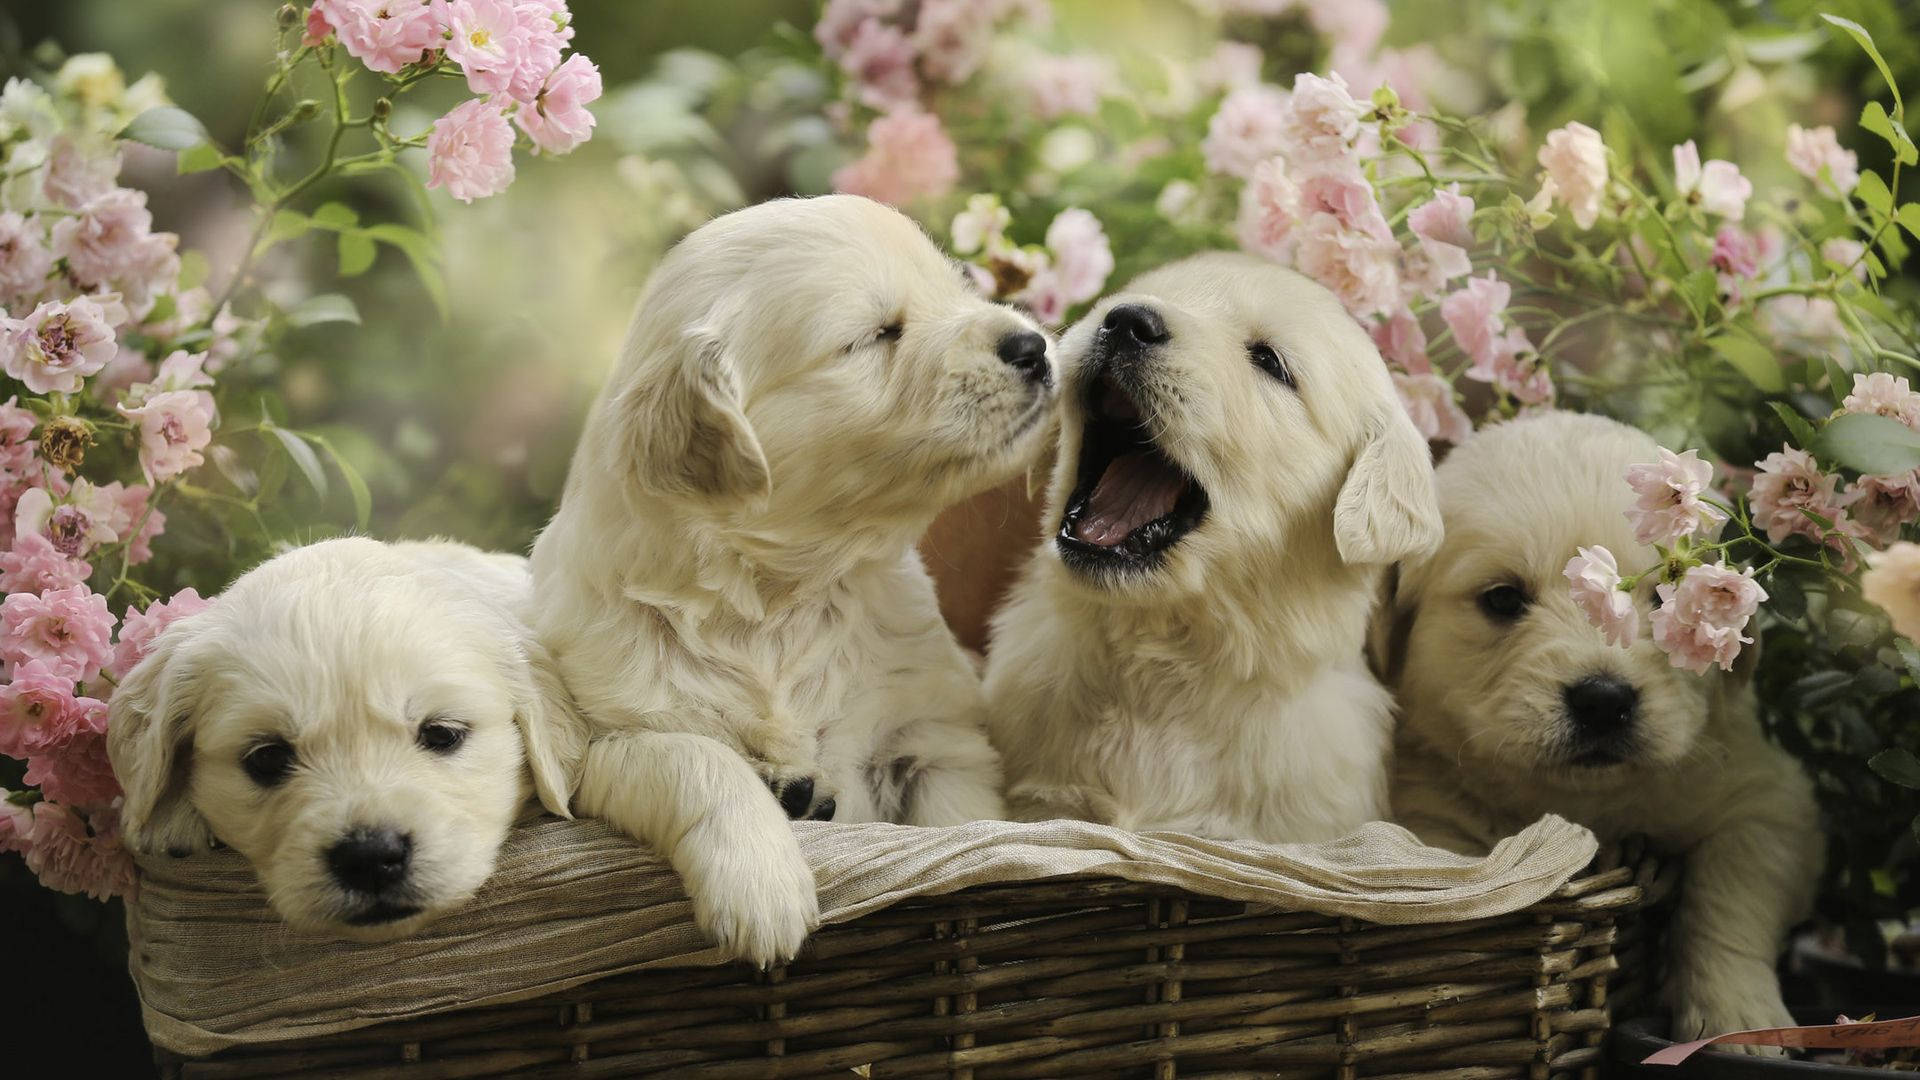 Puppies In Basket With Flowers Wallpaper